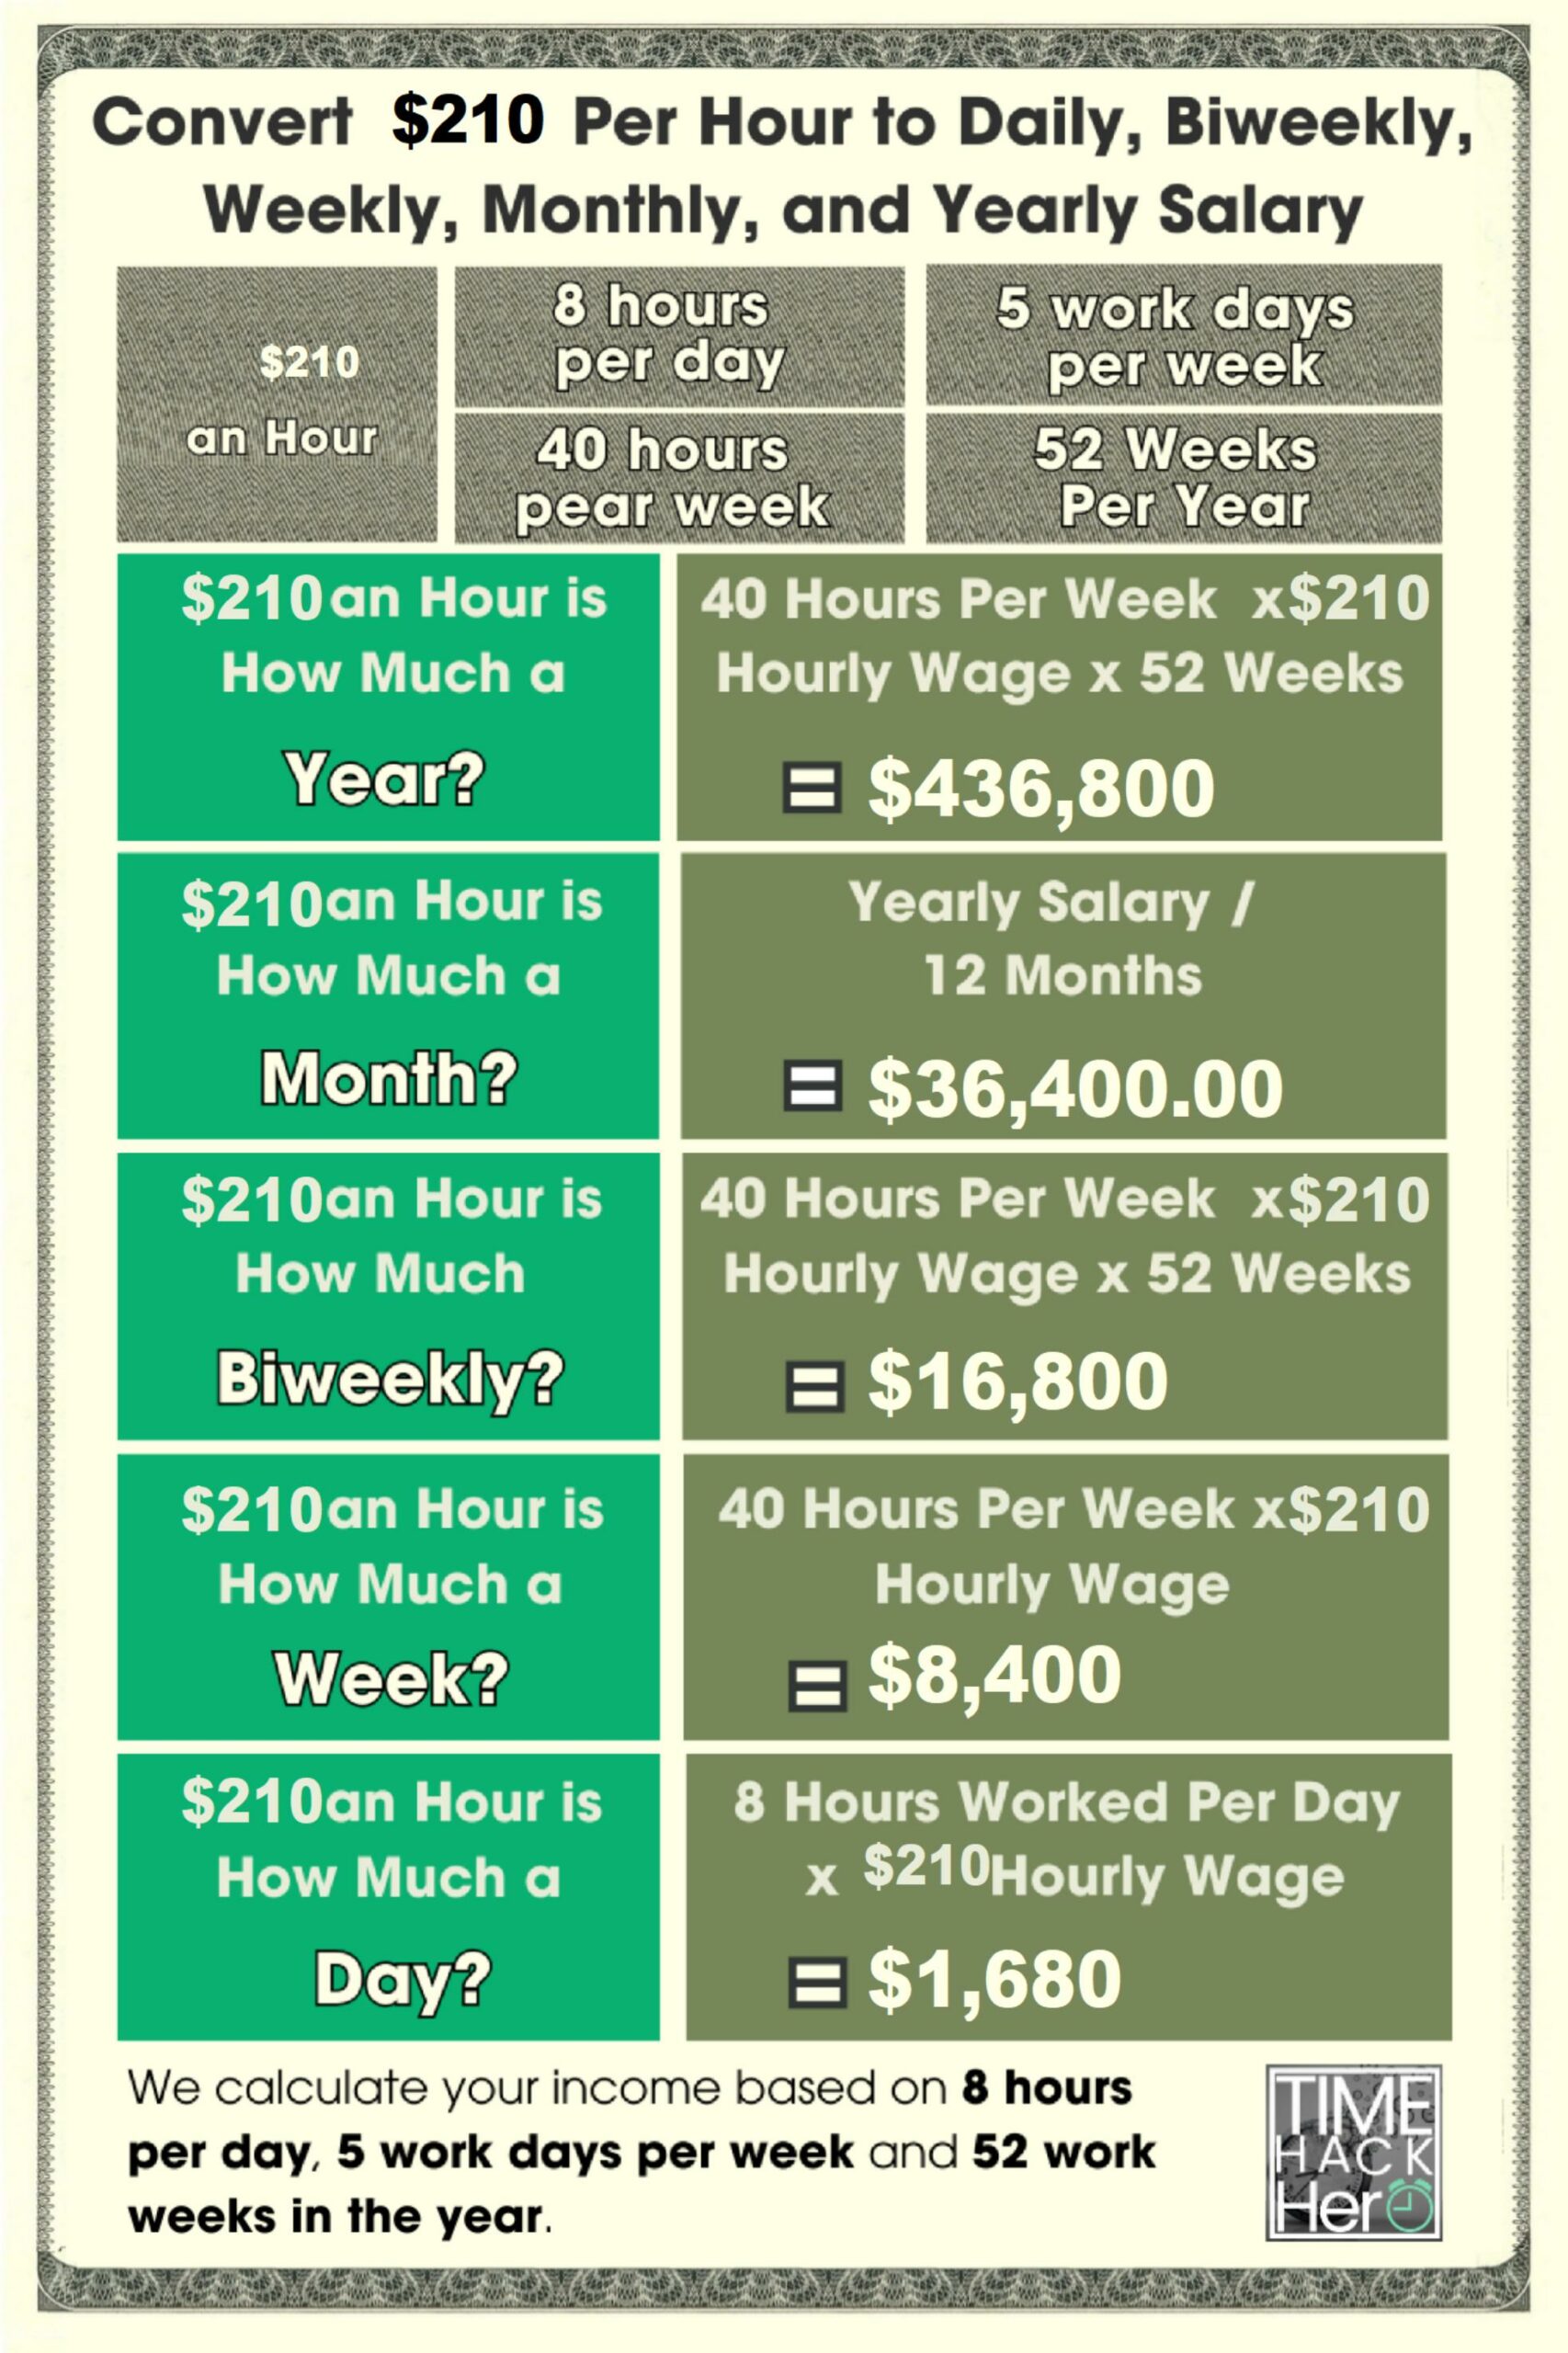 Convert $210 Per Hour to Weekly, Monthly, and Yearly Salary